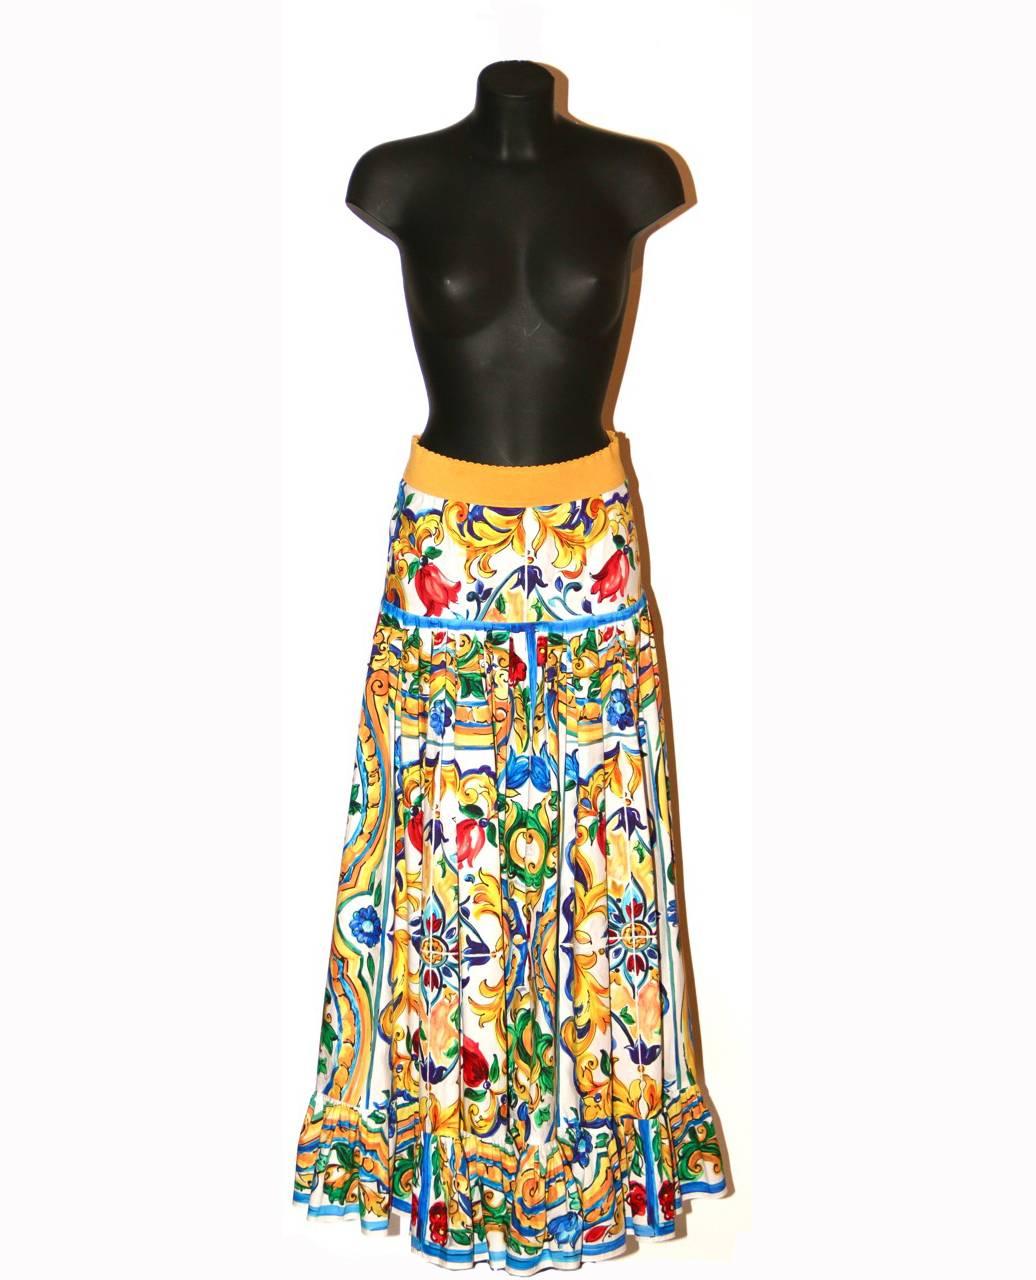 This swirling colored cotton skirt is an uplifting showcase of Dolce & Gabbana's Maiolica pattern. It features an elastic yellow waistband and a back zipper.
(presented with a blue cotton knit top from Hermes not included in the price)

Collection: